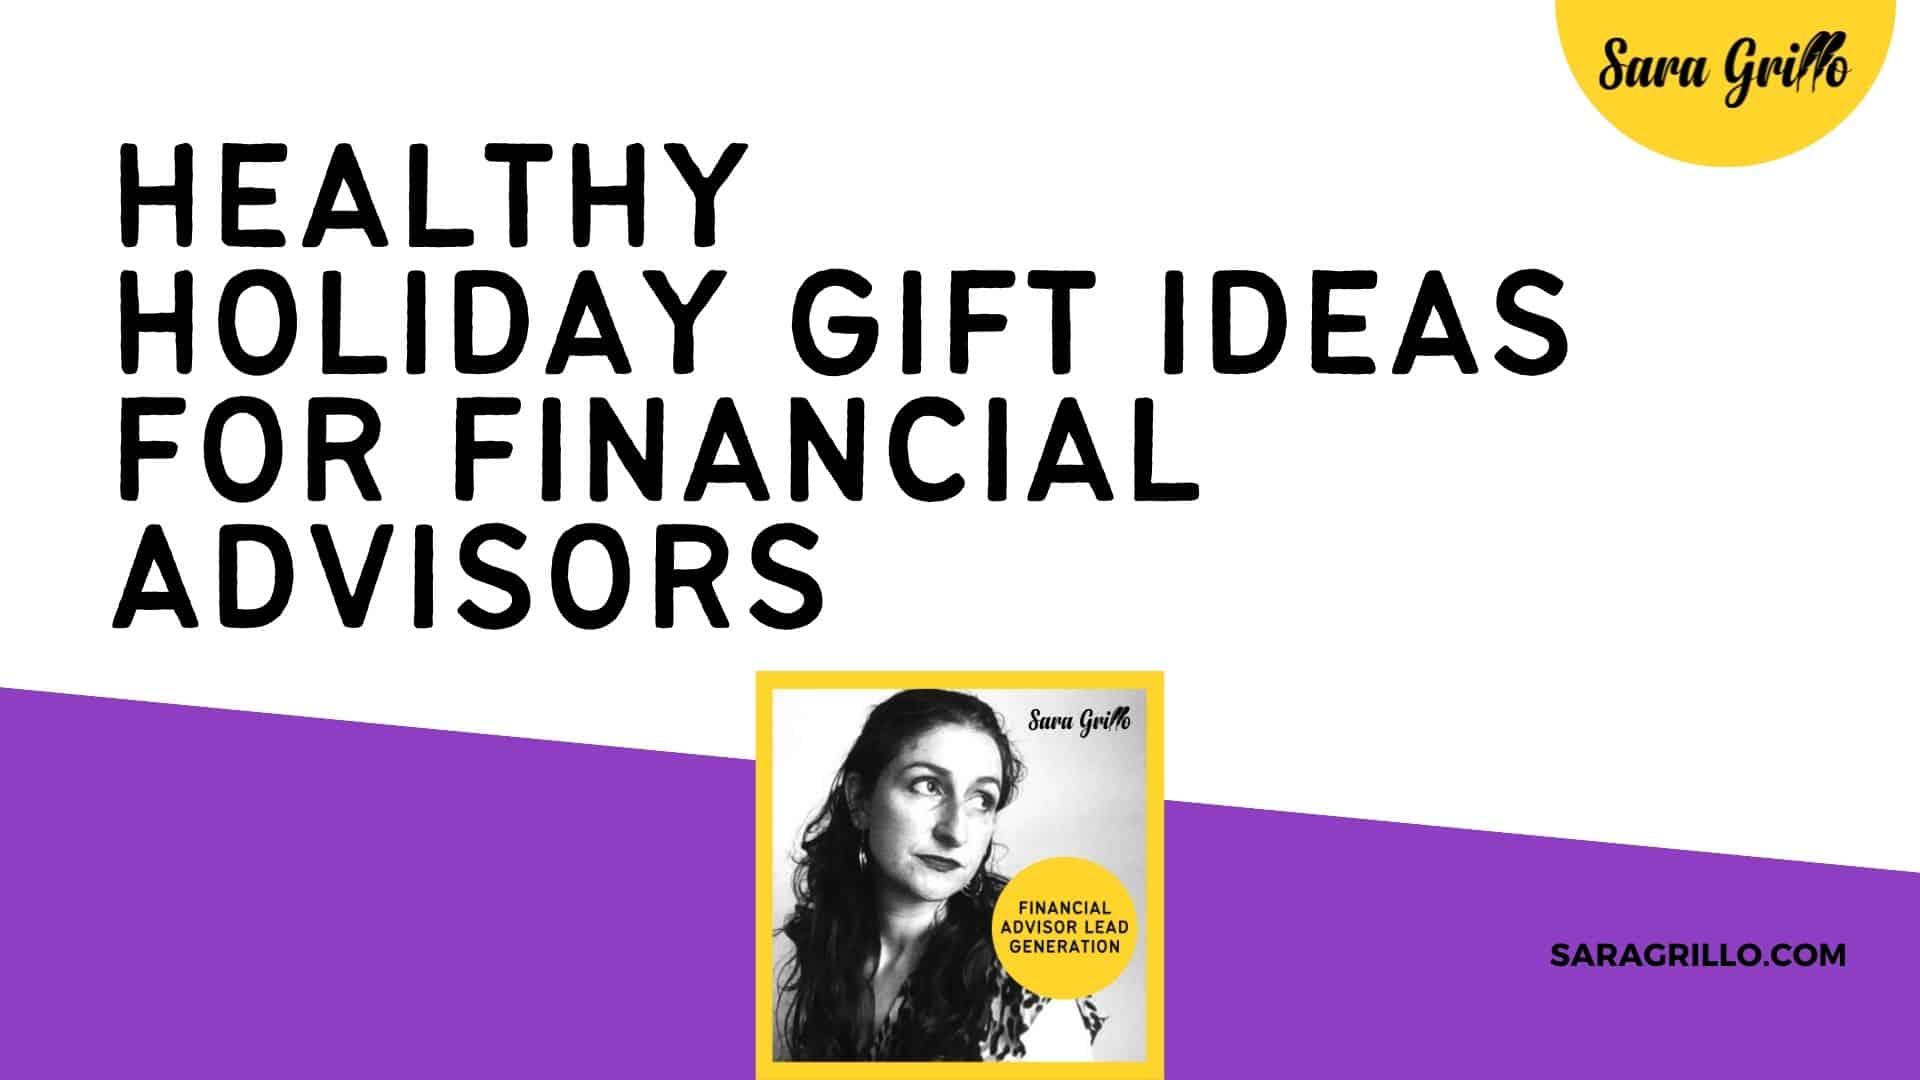 Here are 7 healthy holiday gift ideas for financial advisors